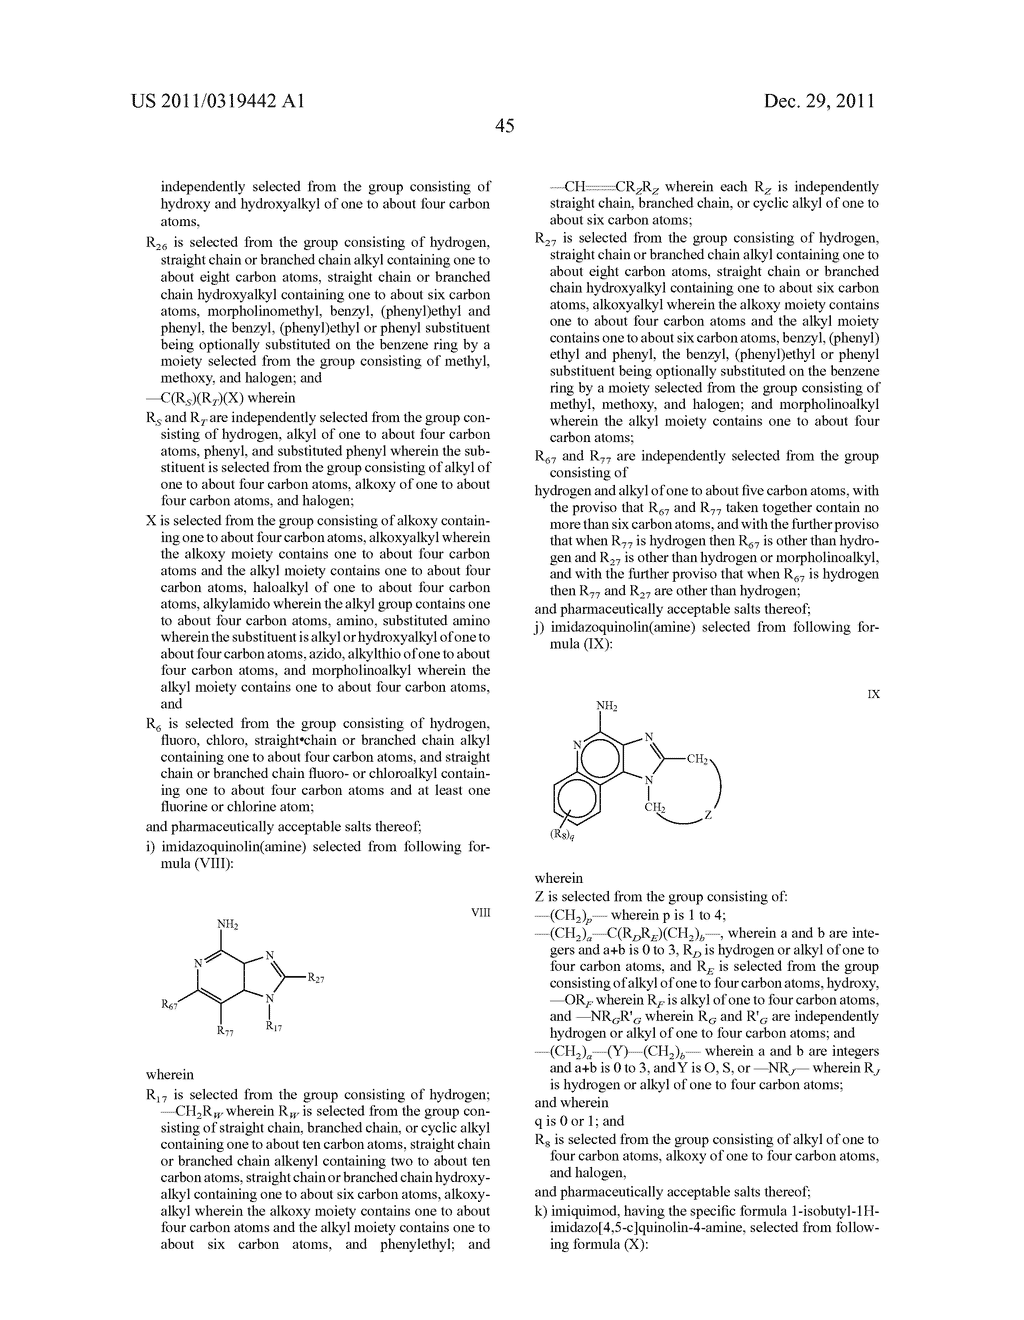 PHARMACEUTICAL COMPOSITIONS COMPRISING IMIDAZOQUINOLIN(AMINES) AND     DERIVATIVES THEREOF SUITABLE FOR LOCAL ADMINISTRATION - diagram, schematic, and image 72